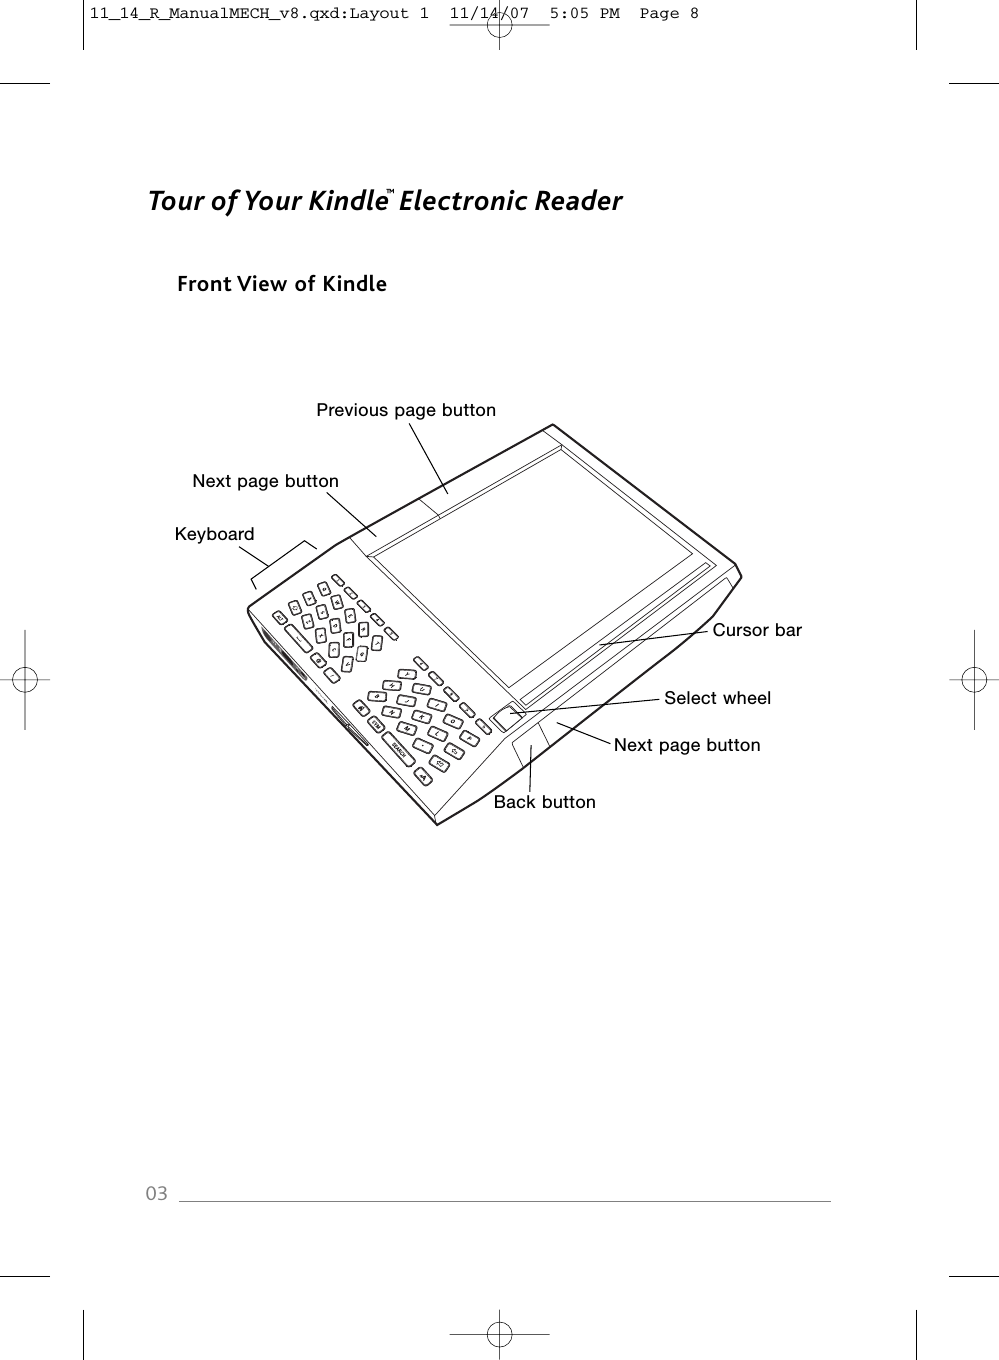 Tour of Your Kindle Electronic ReaderFront View of Kindle03Cursor barKeyboardSelect wheelNext page buttonBack buttonPrevious page buttonNext page button™11_14_R_ManualMECH_v8.qxd:Layout 1  11/14/07  5:05 PM  Page 8